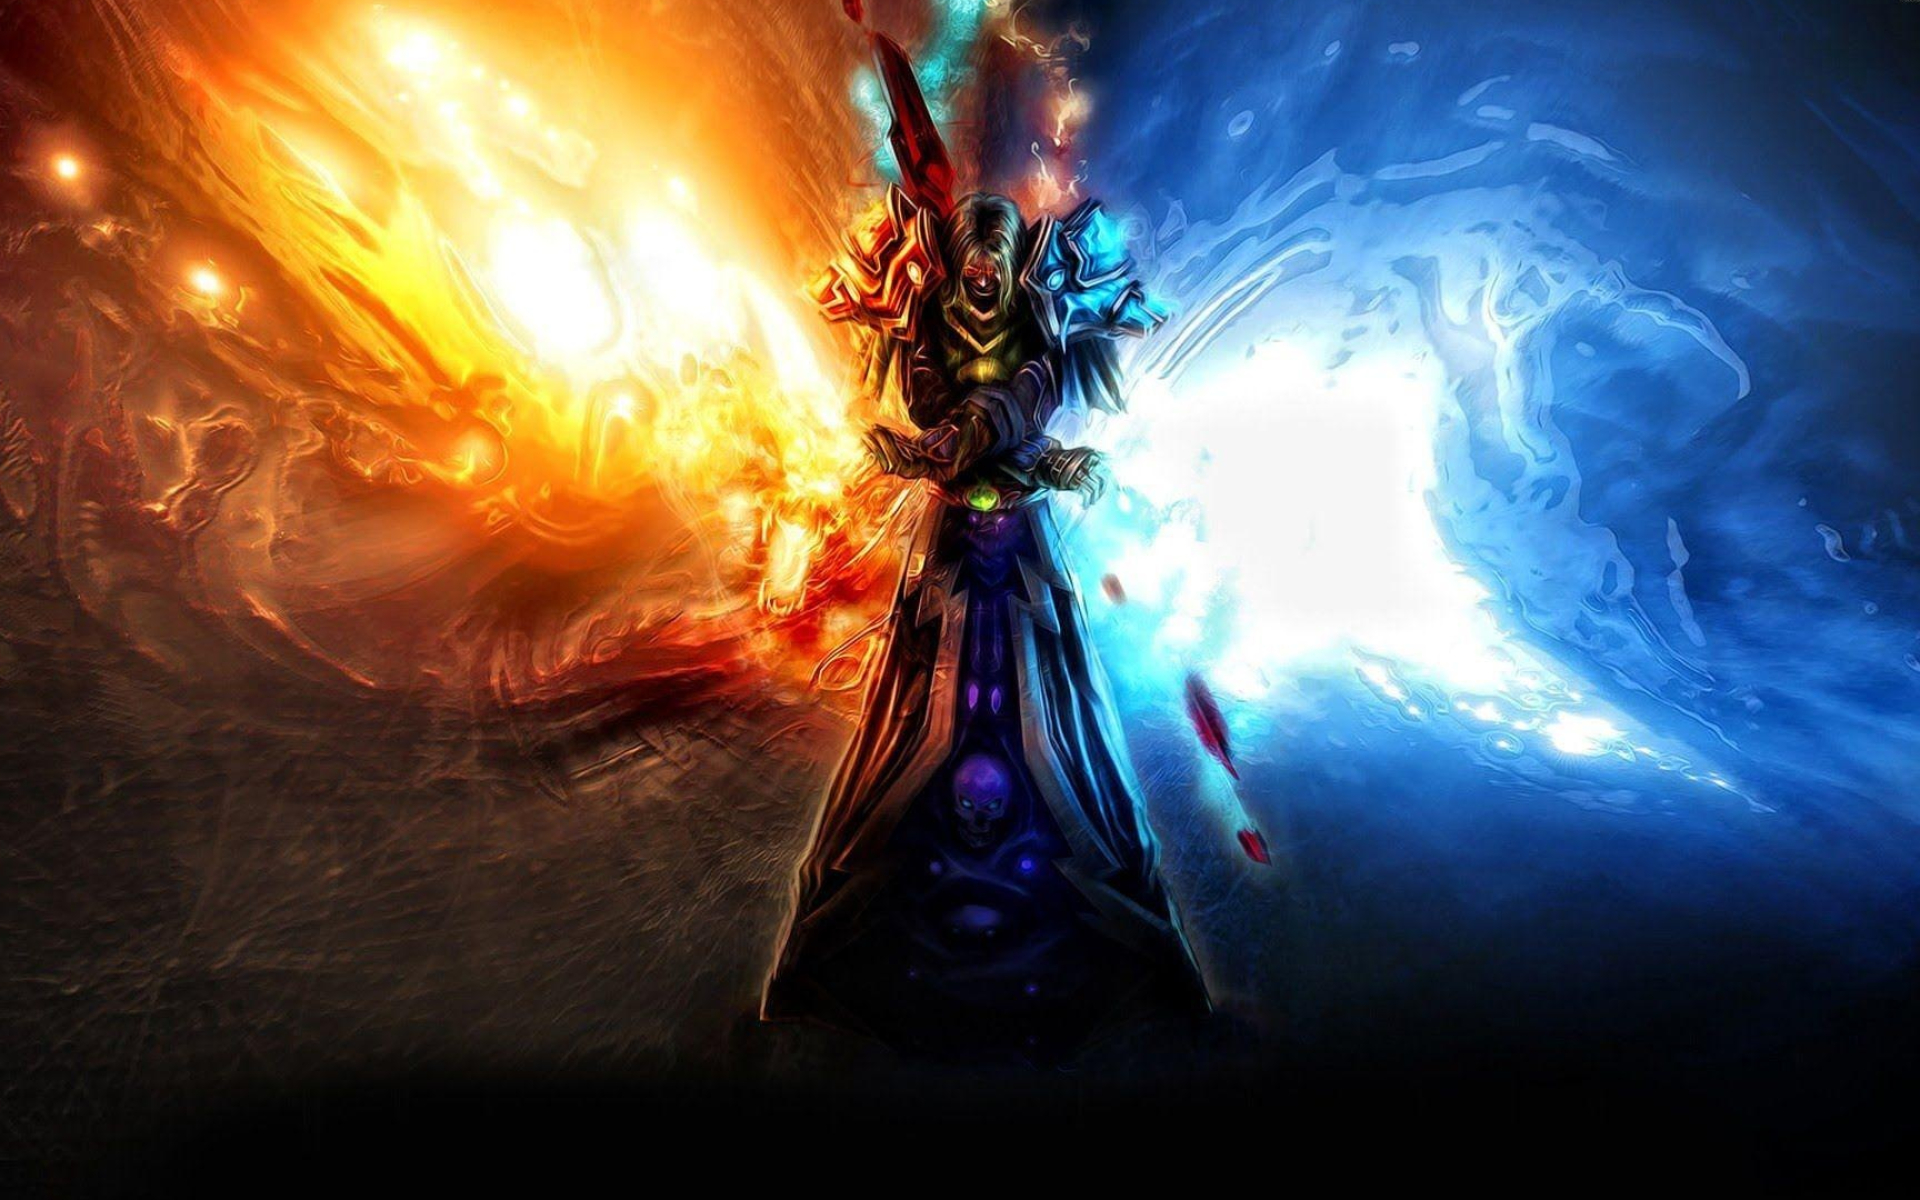 Warcraft mage, Powerful spellcasters, Azeroth's guardians, Epic fantasy, 1920x1200 HD Desktop